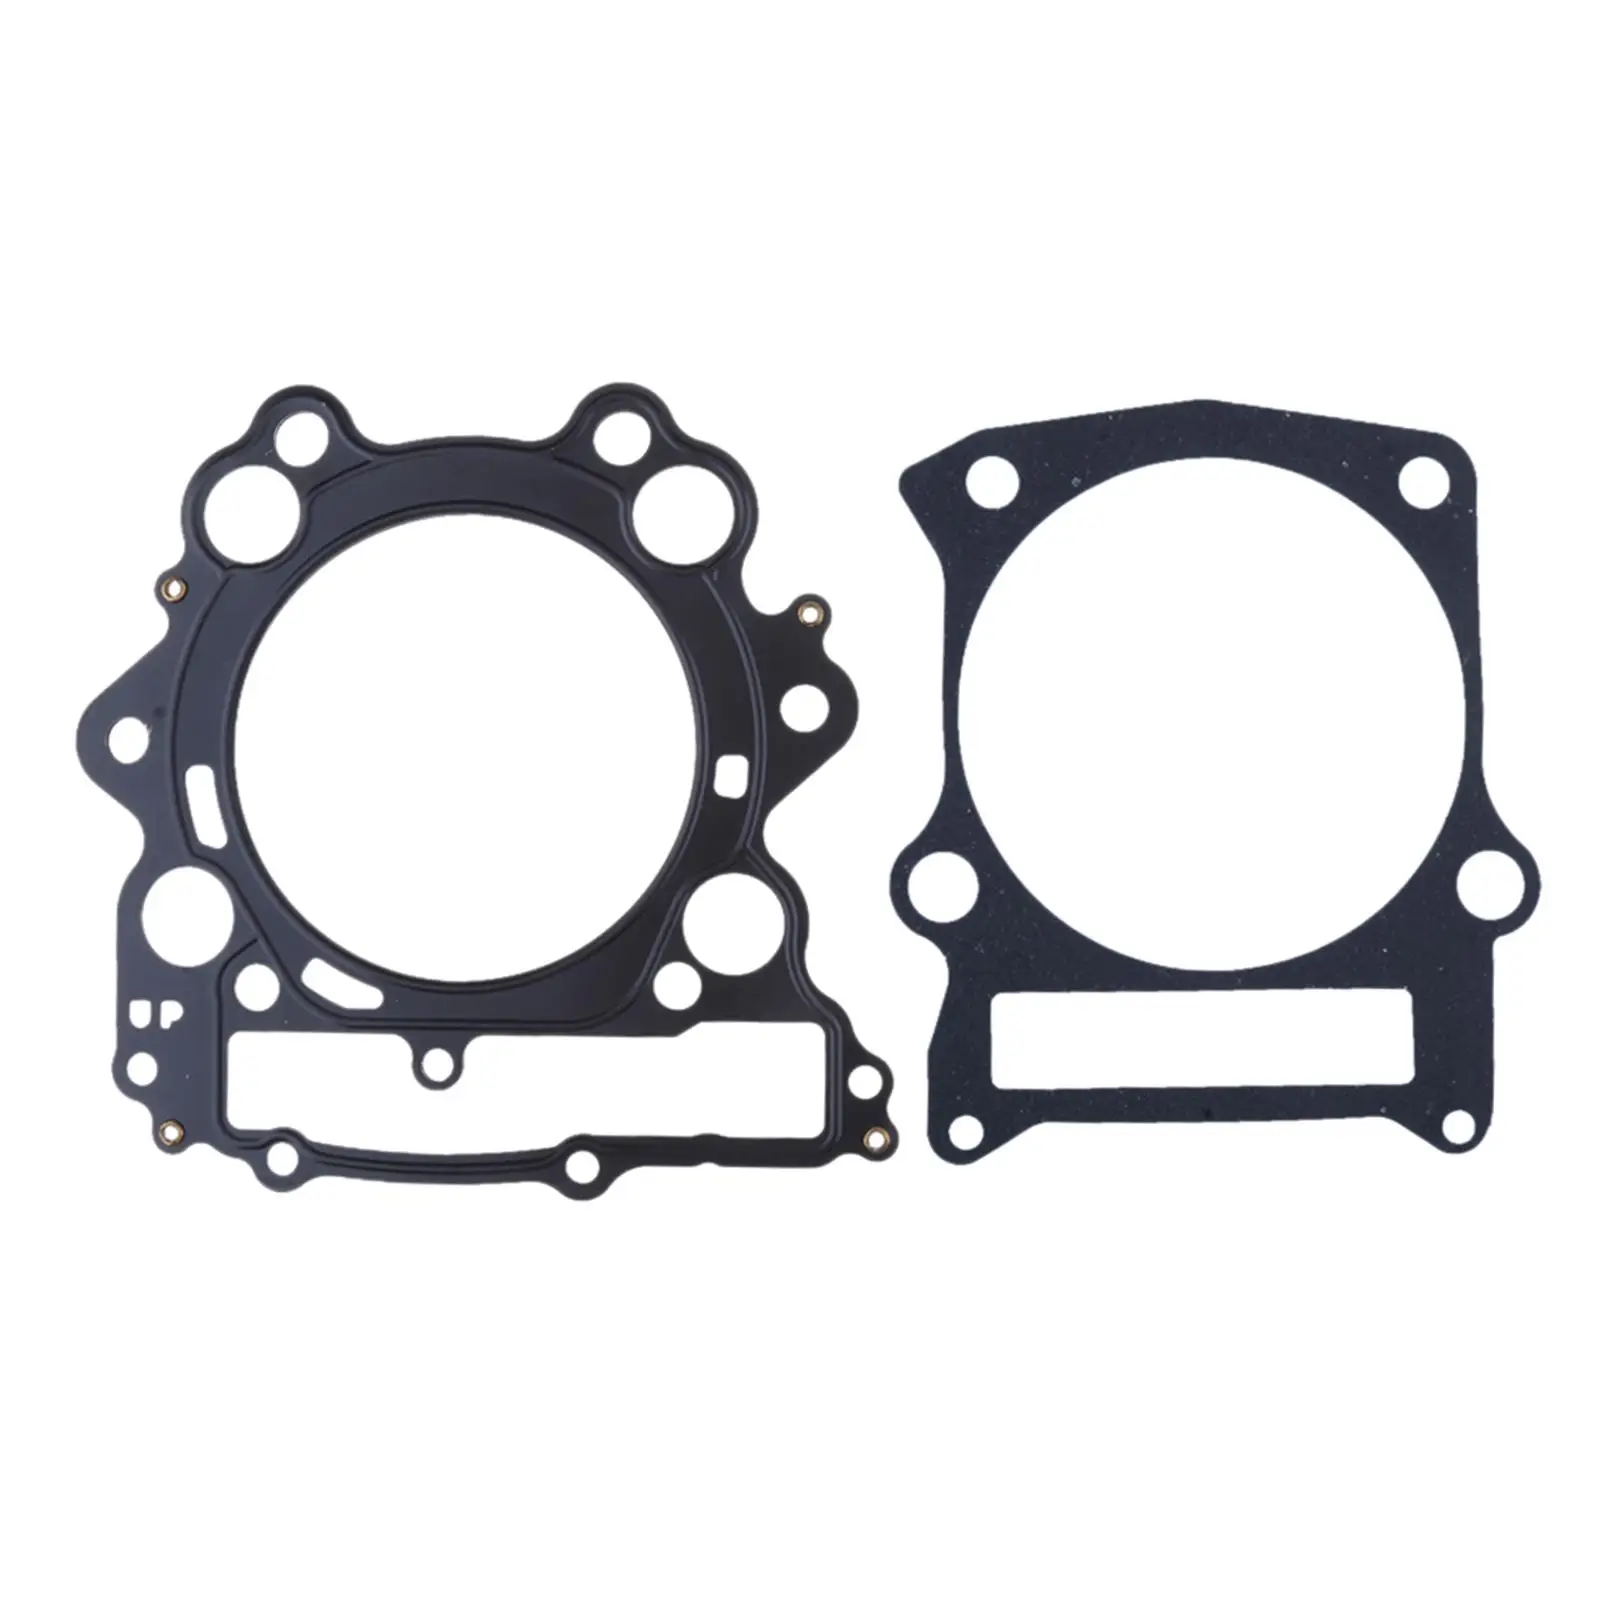 New Top End Head Gasket for 700 Massimo   HS MSU700